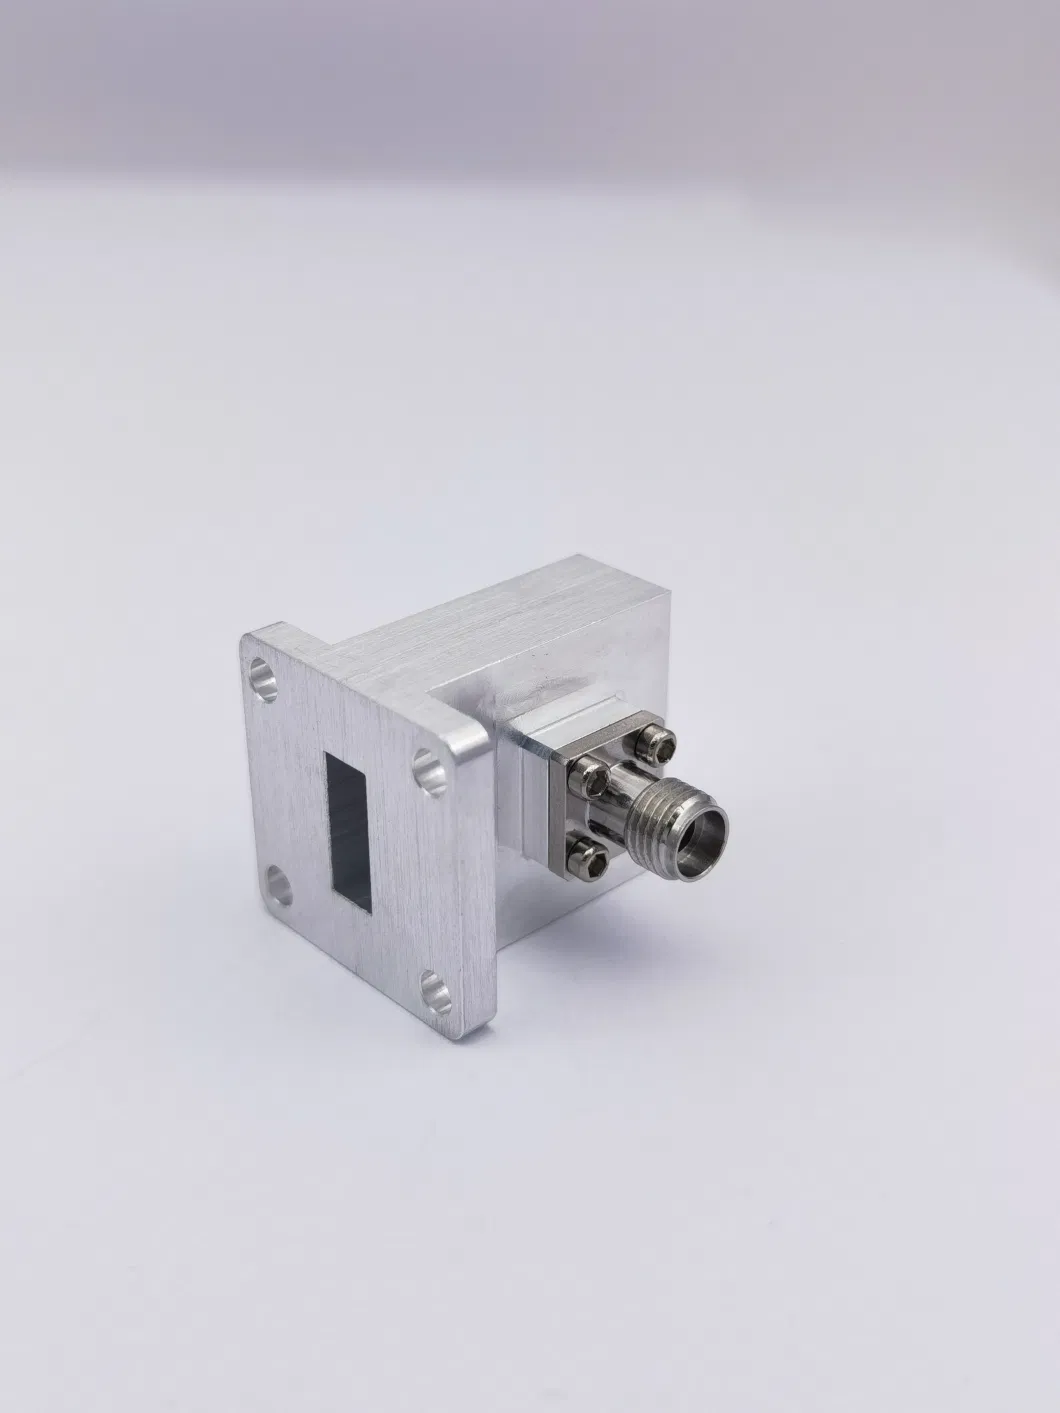 Wr42 18GHz~26.5GHz Yuecome Waveguide to Coaxial Adaptor SMA or 2.92mm